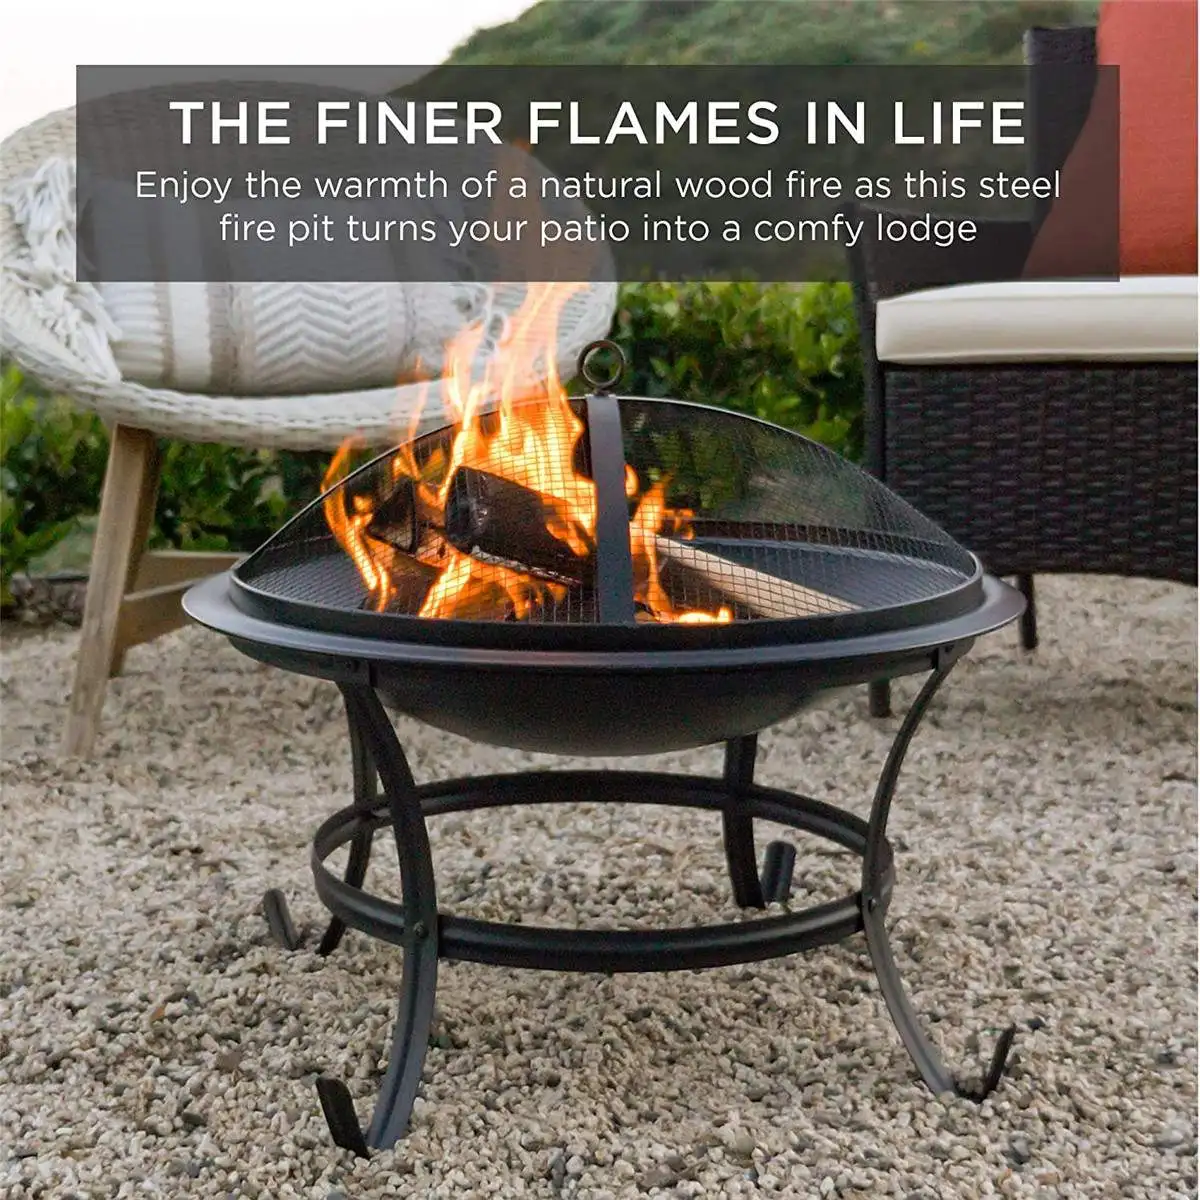 22 Inch Garden Fire Pit Camping Firepit With Mesh Screen Durability Fire Frame Wood Burning Charcoal Stove BBQ Grill